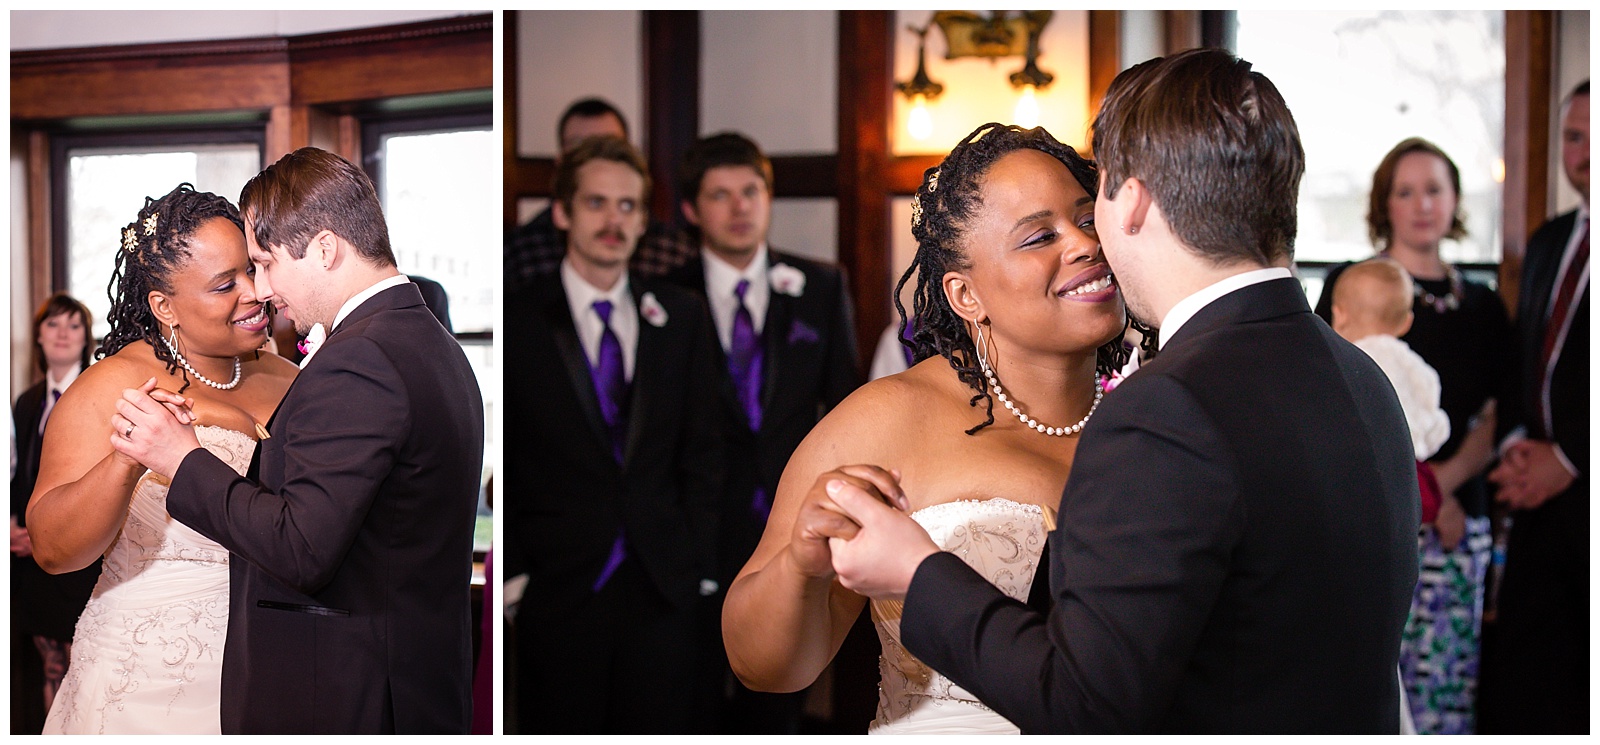 Wedding photography at Simpson House in Kansas City, captured by Wisdom-Watson Weddings.